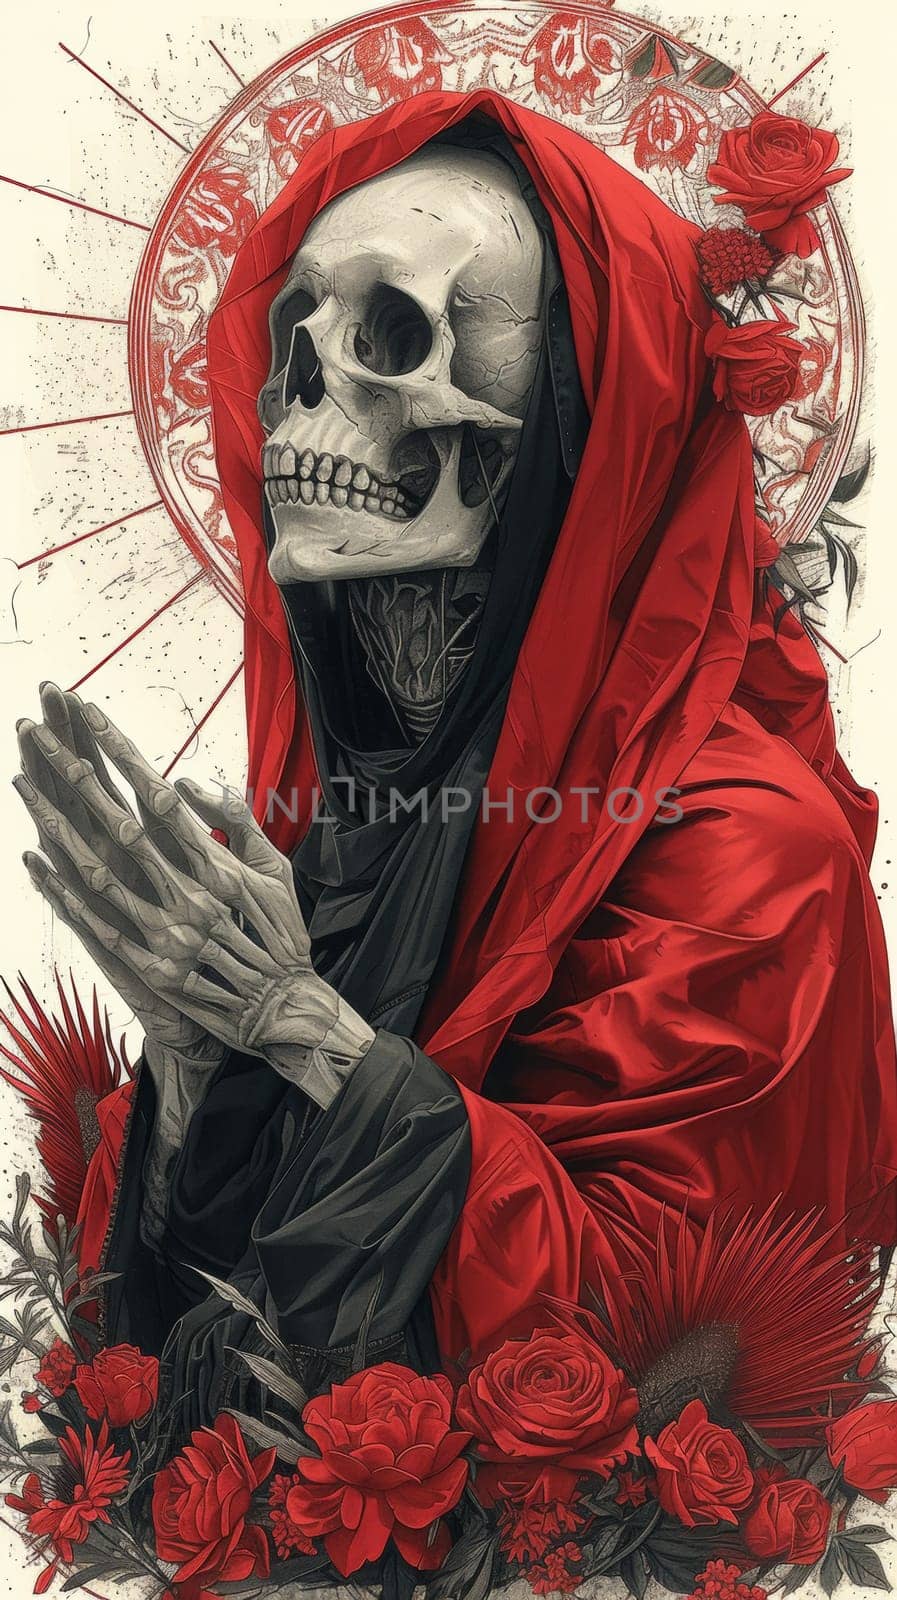 A painting of a skeleton in red robes praying with flowers